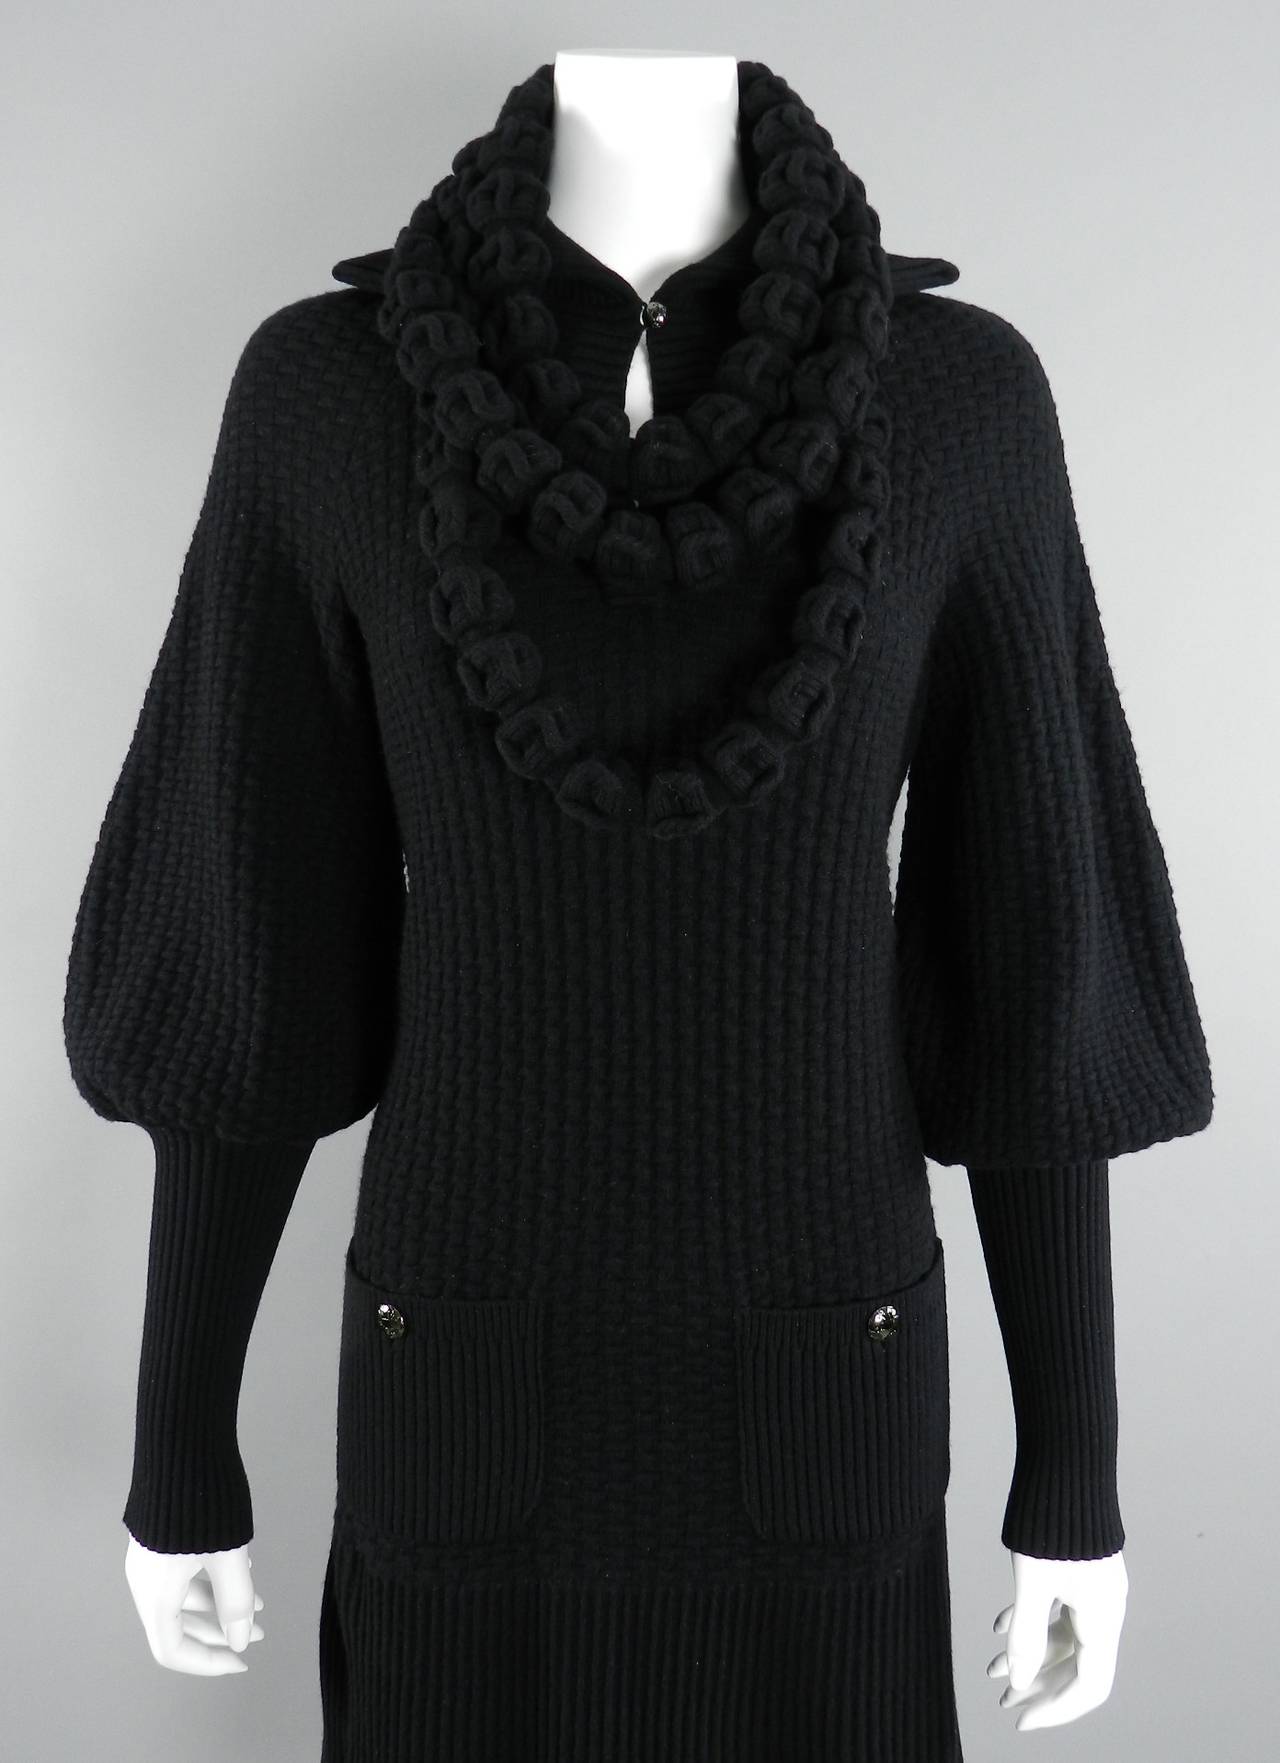 Chanel 13A Runway Black Knit Sweater Dress with Necklace 2